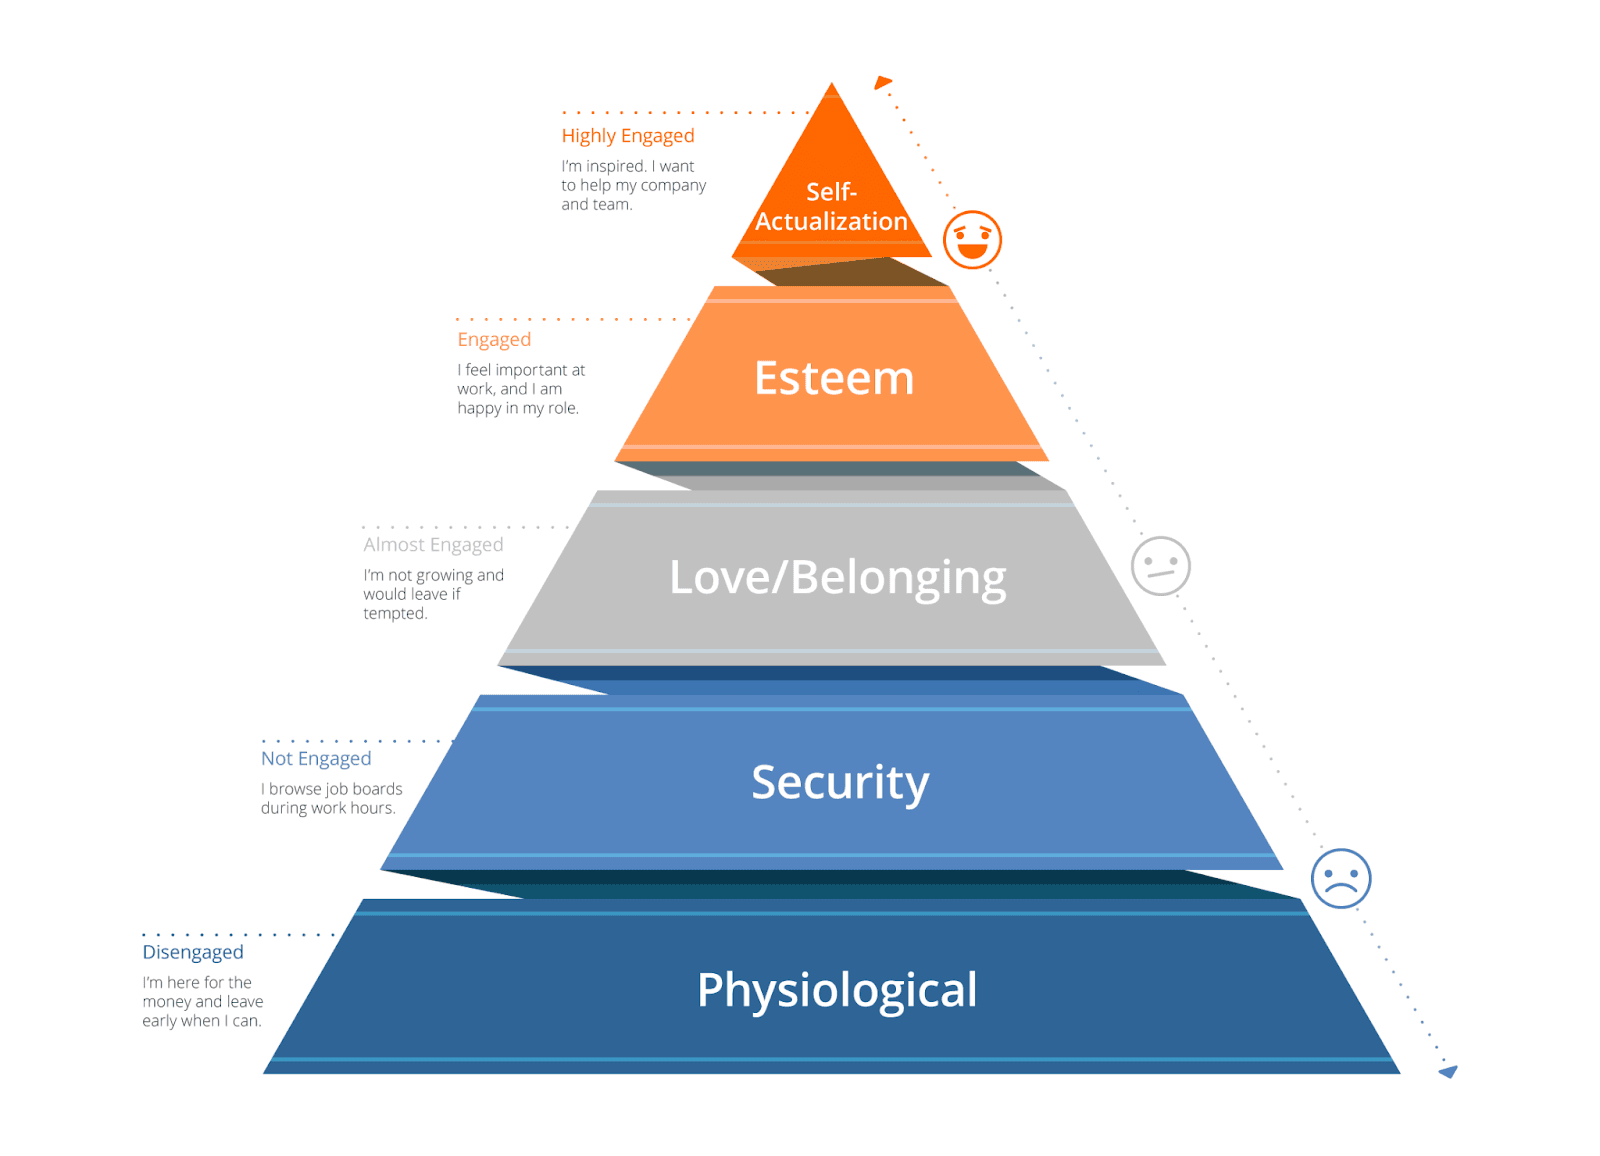 Maslow's hierarchy of human needs triangle